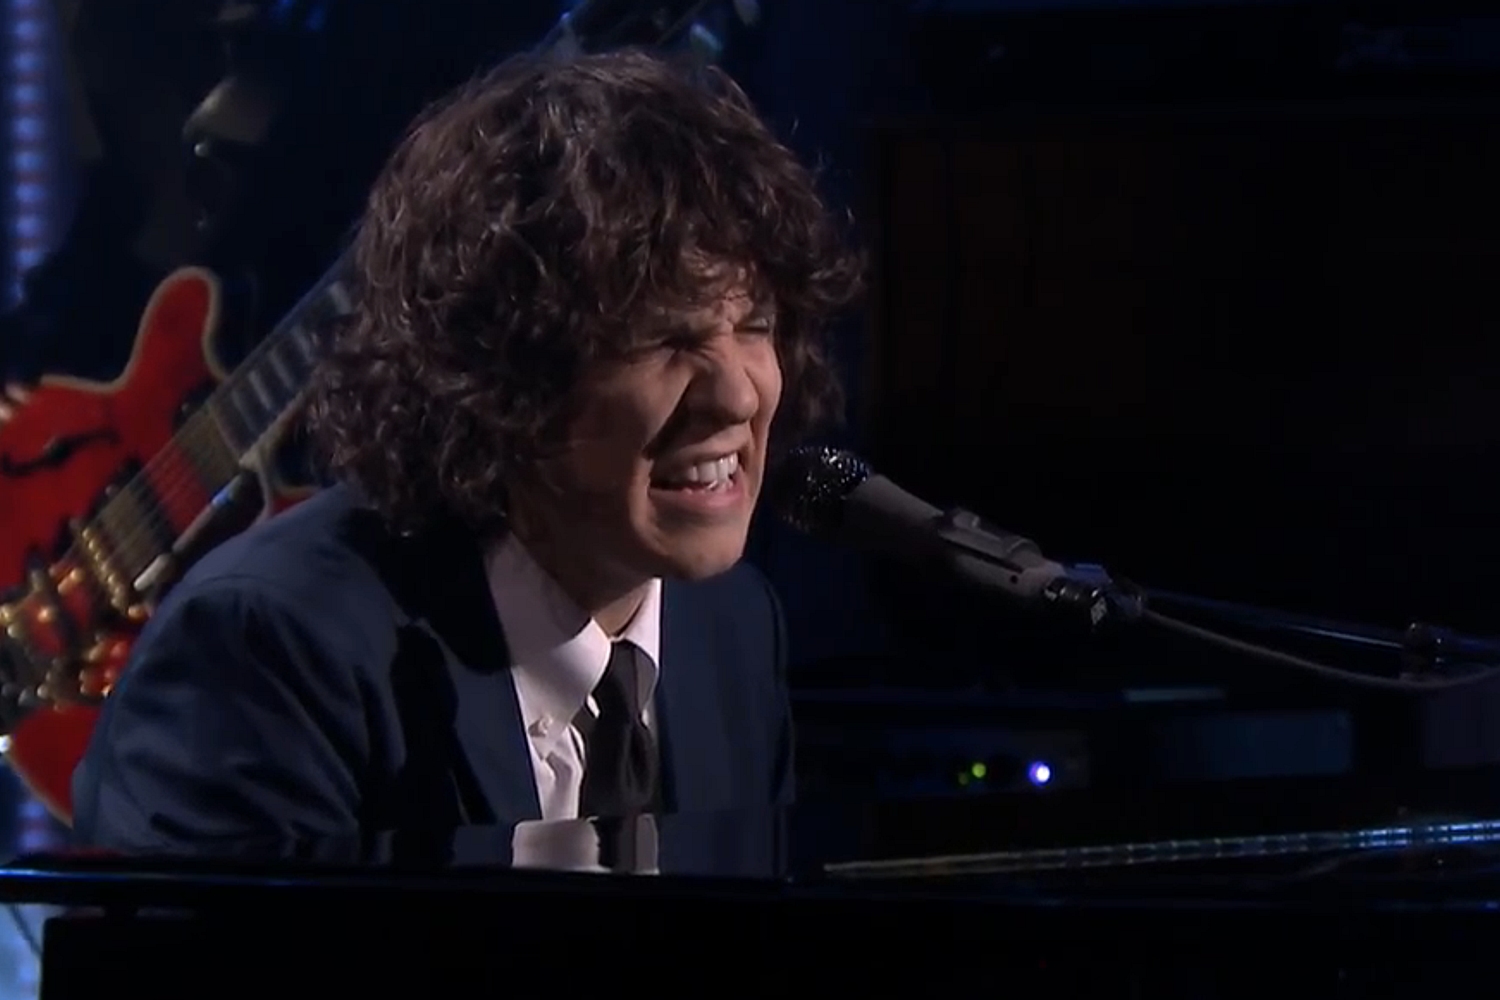 Watch Tobias Jesso Jr. make his television debut with The Roots on Fallon